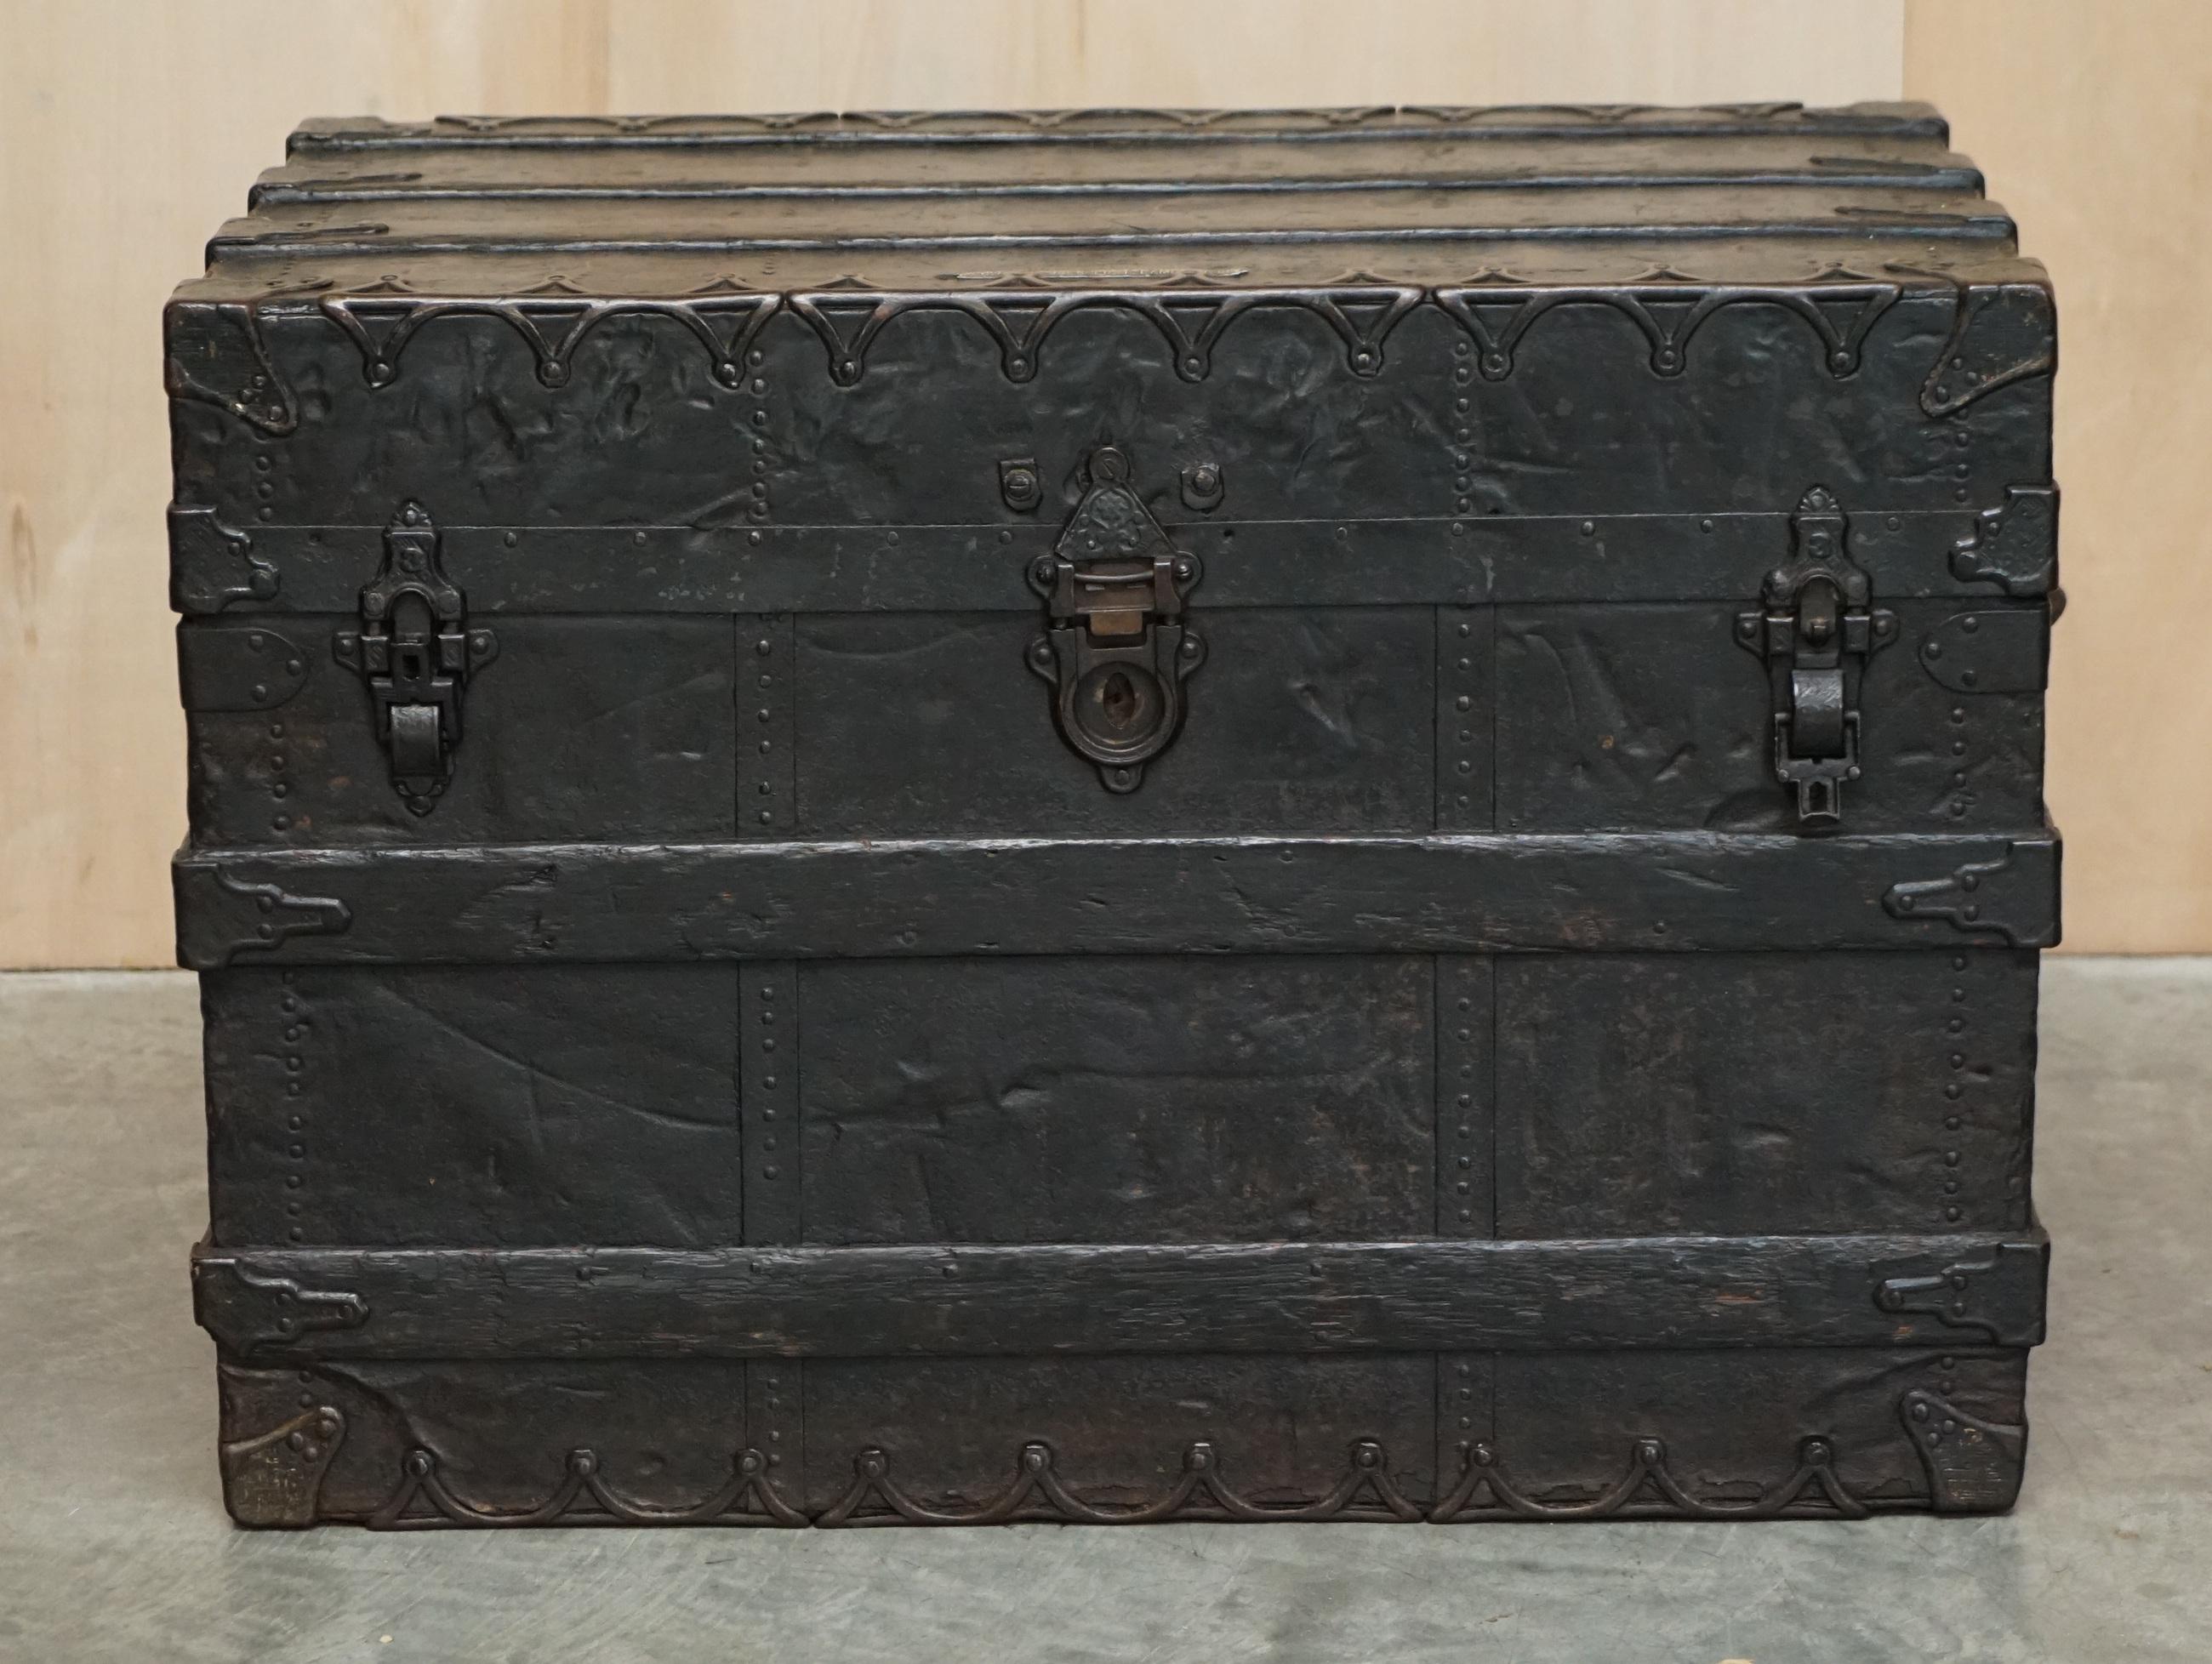 We are delighted to offer for sale this original circa 1889 iron and steel American Steamer travelling trunk made by CA Taylor of Chicago

This is a very well made example of a steamer trunk designed for luxury travel on cruise liner ships. This